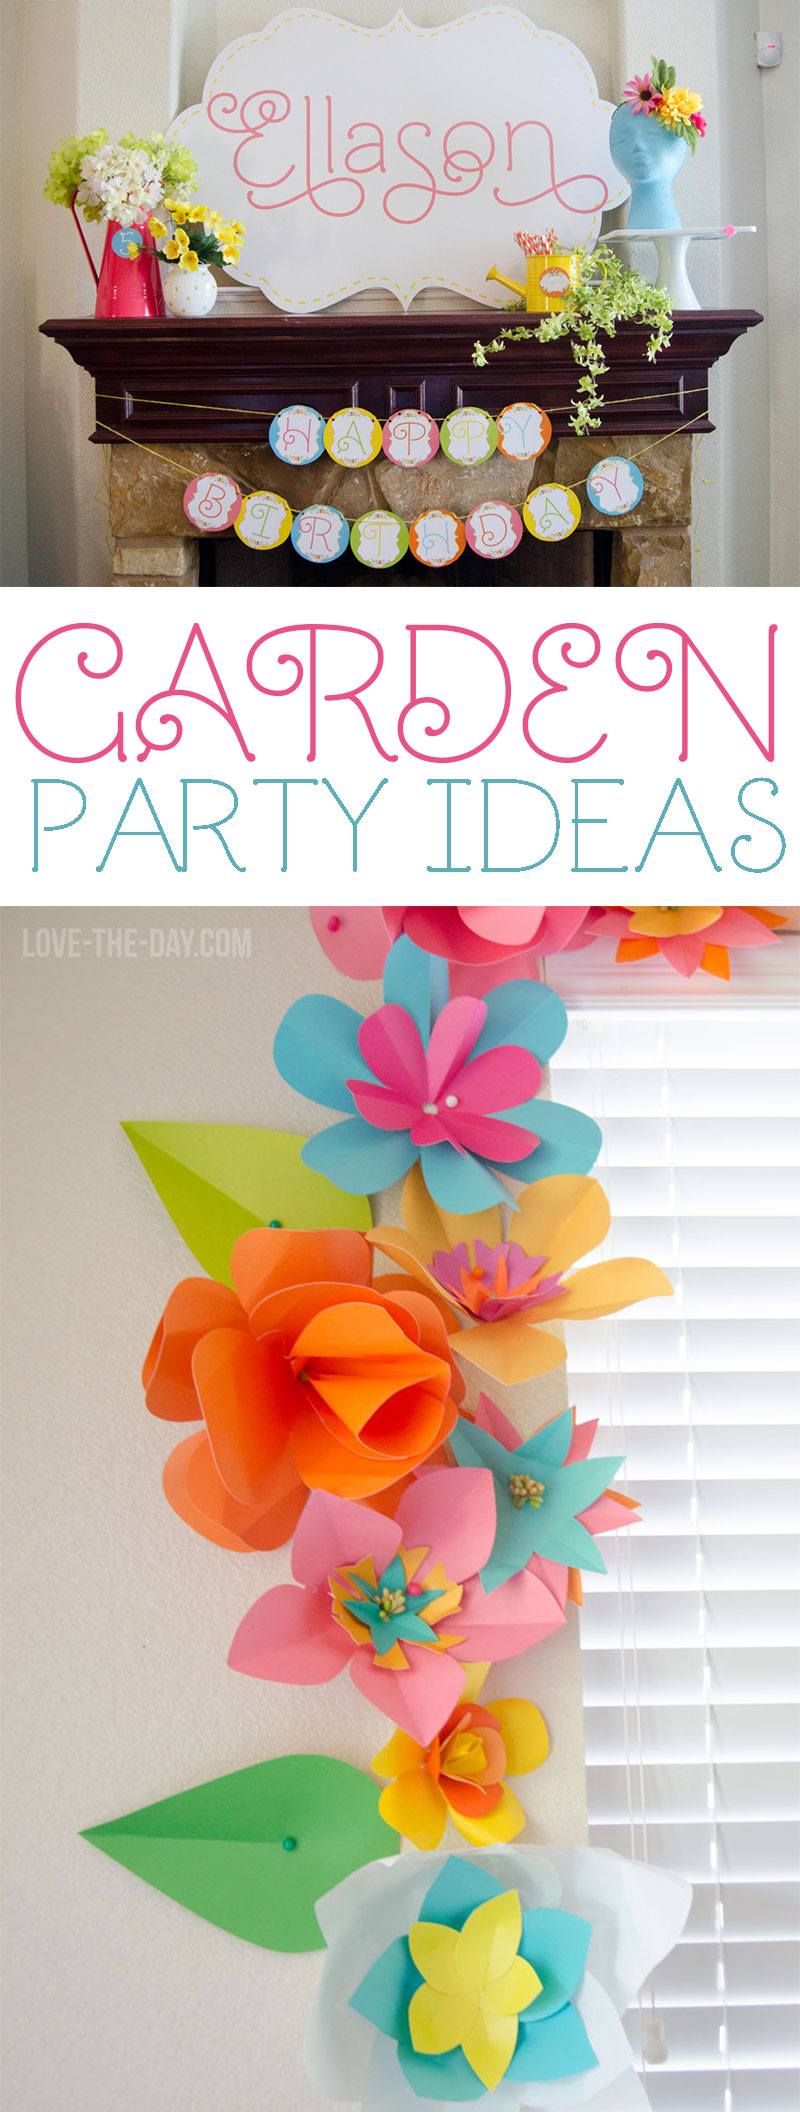 Garden Party Ideas by Lindi Haws of Love The Day